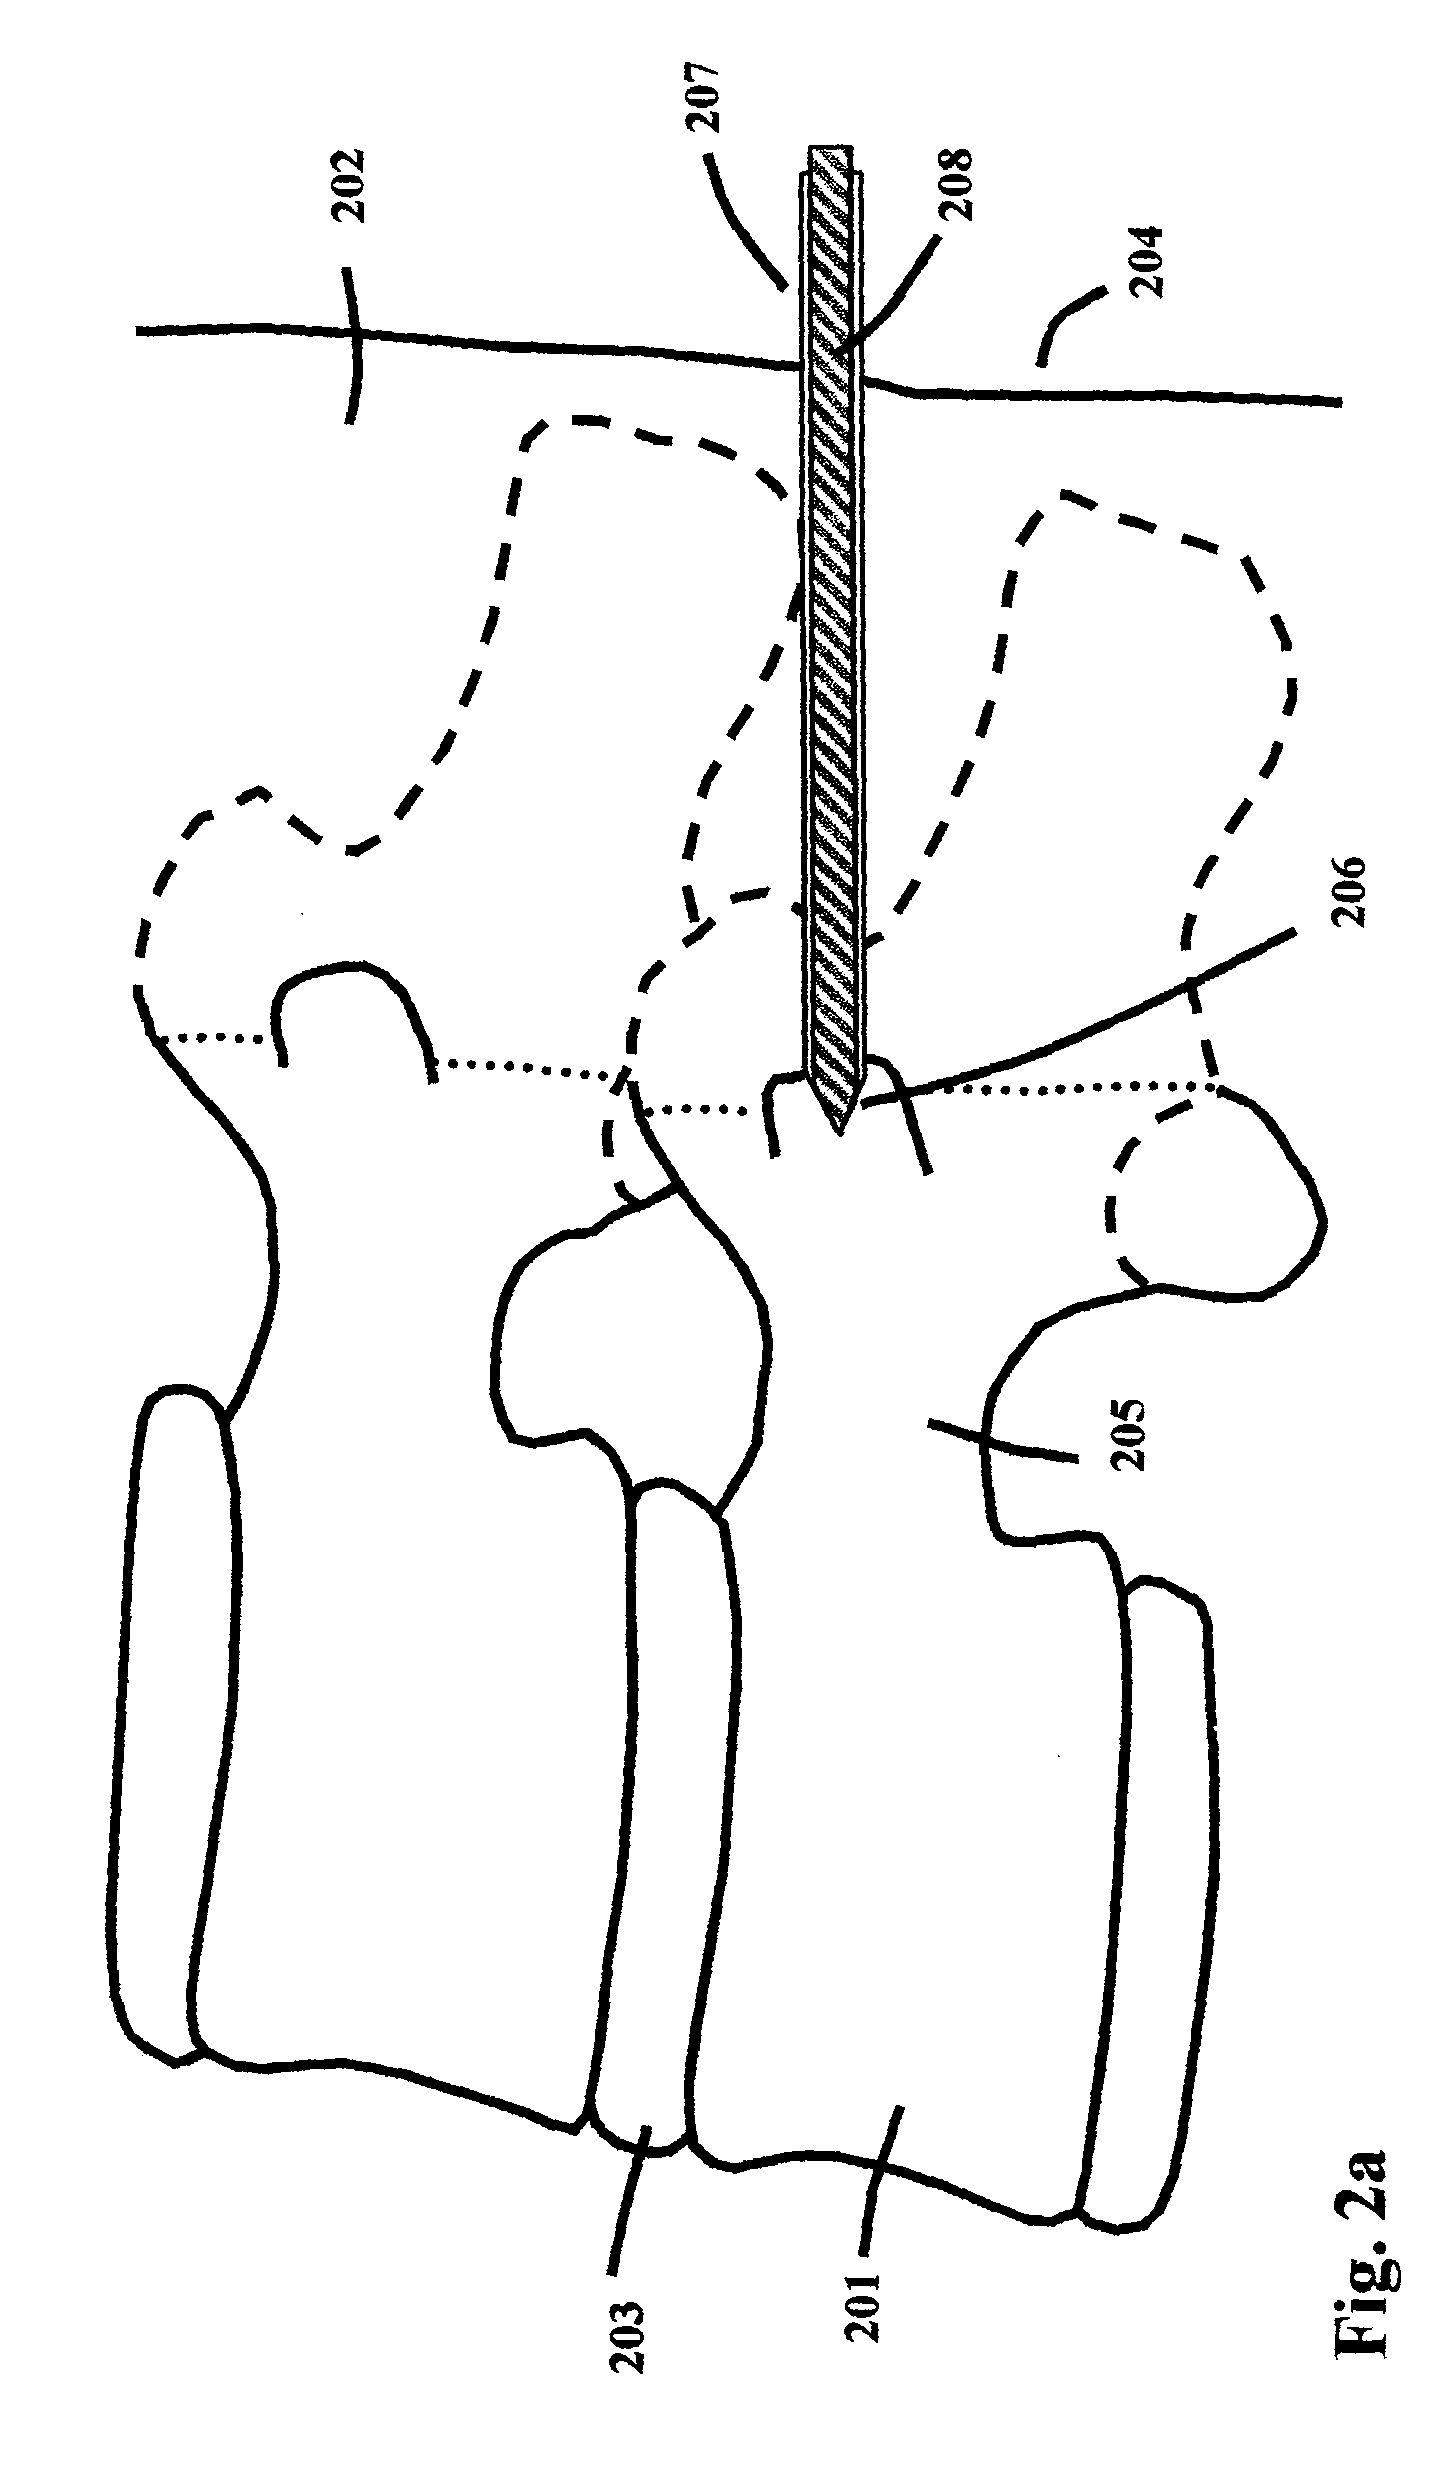 Method and Device for Restoring Spinal Disk Functions